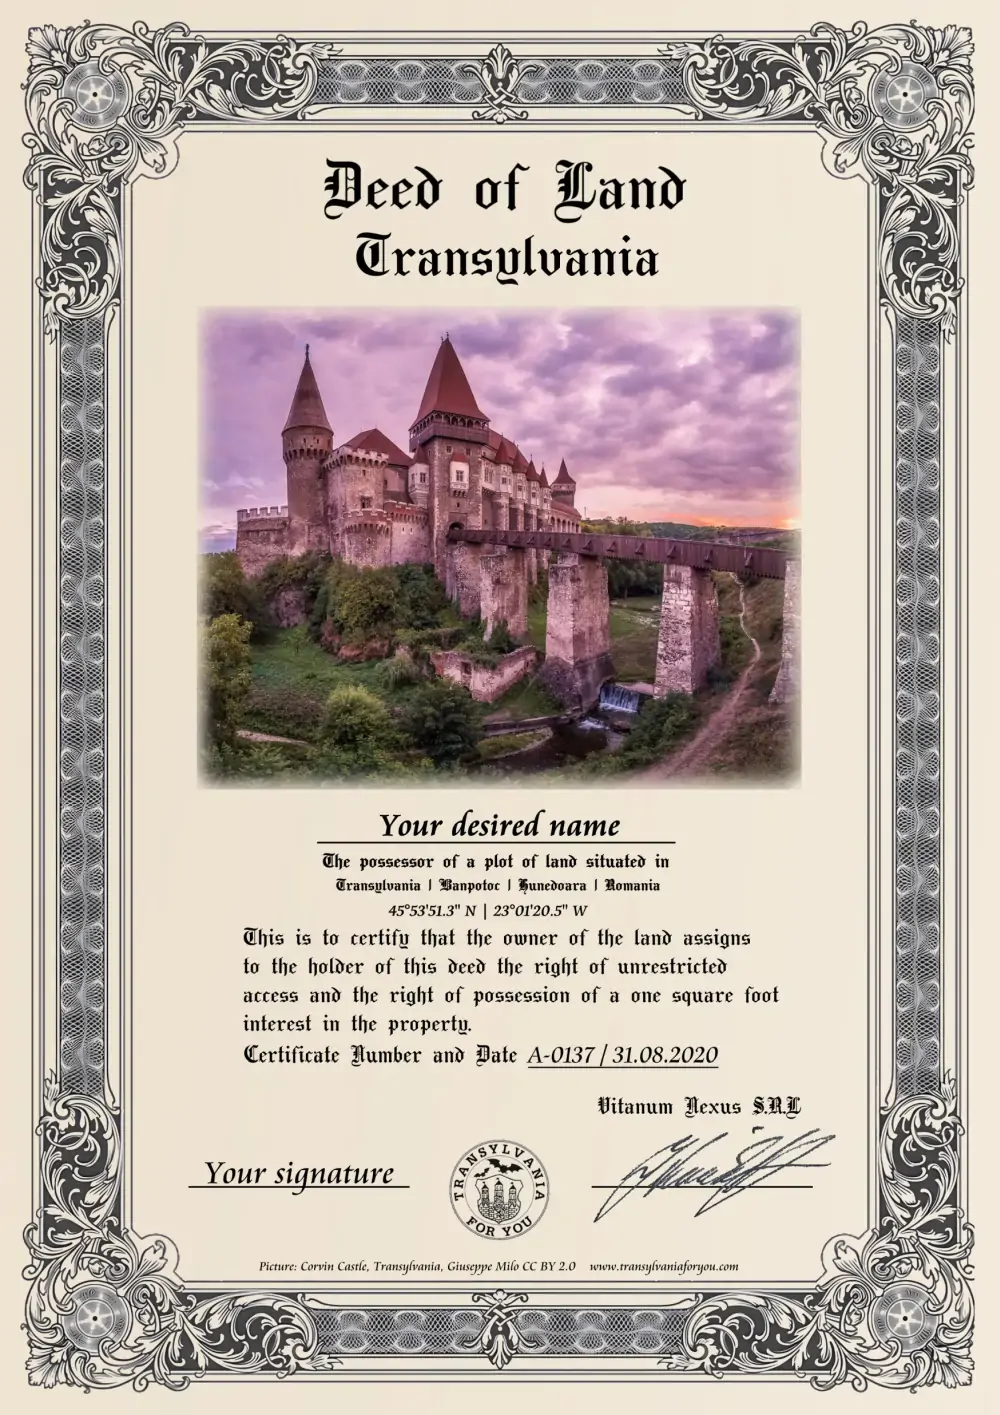 Image on the deed: Corvin Castle